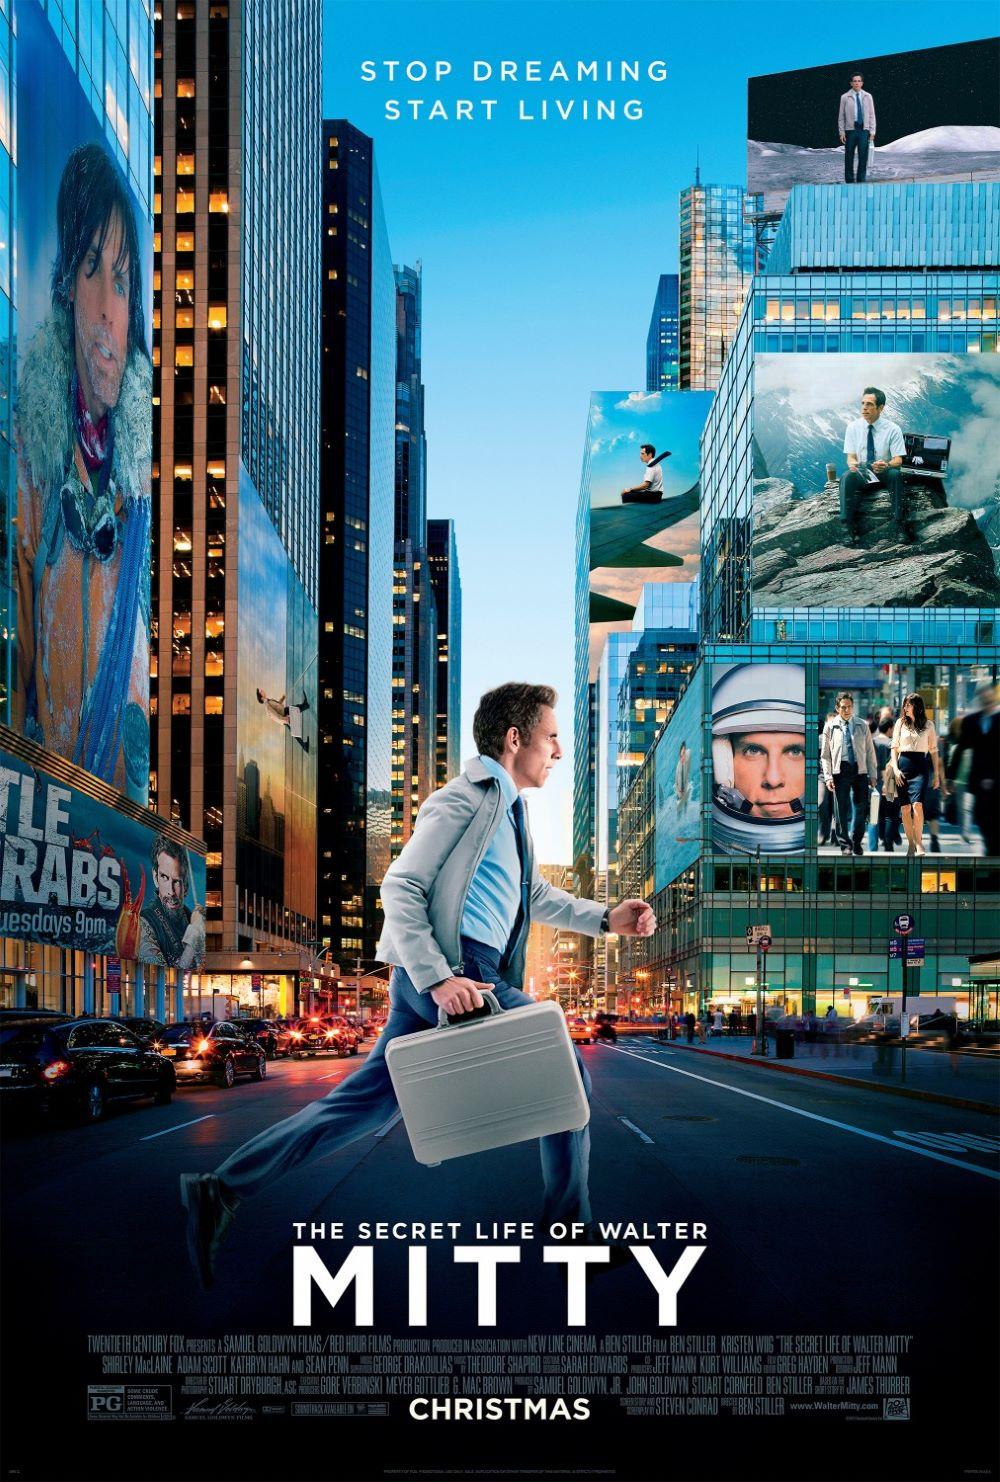 1.THE SECRET LIFE OF WALTER MITTY 